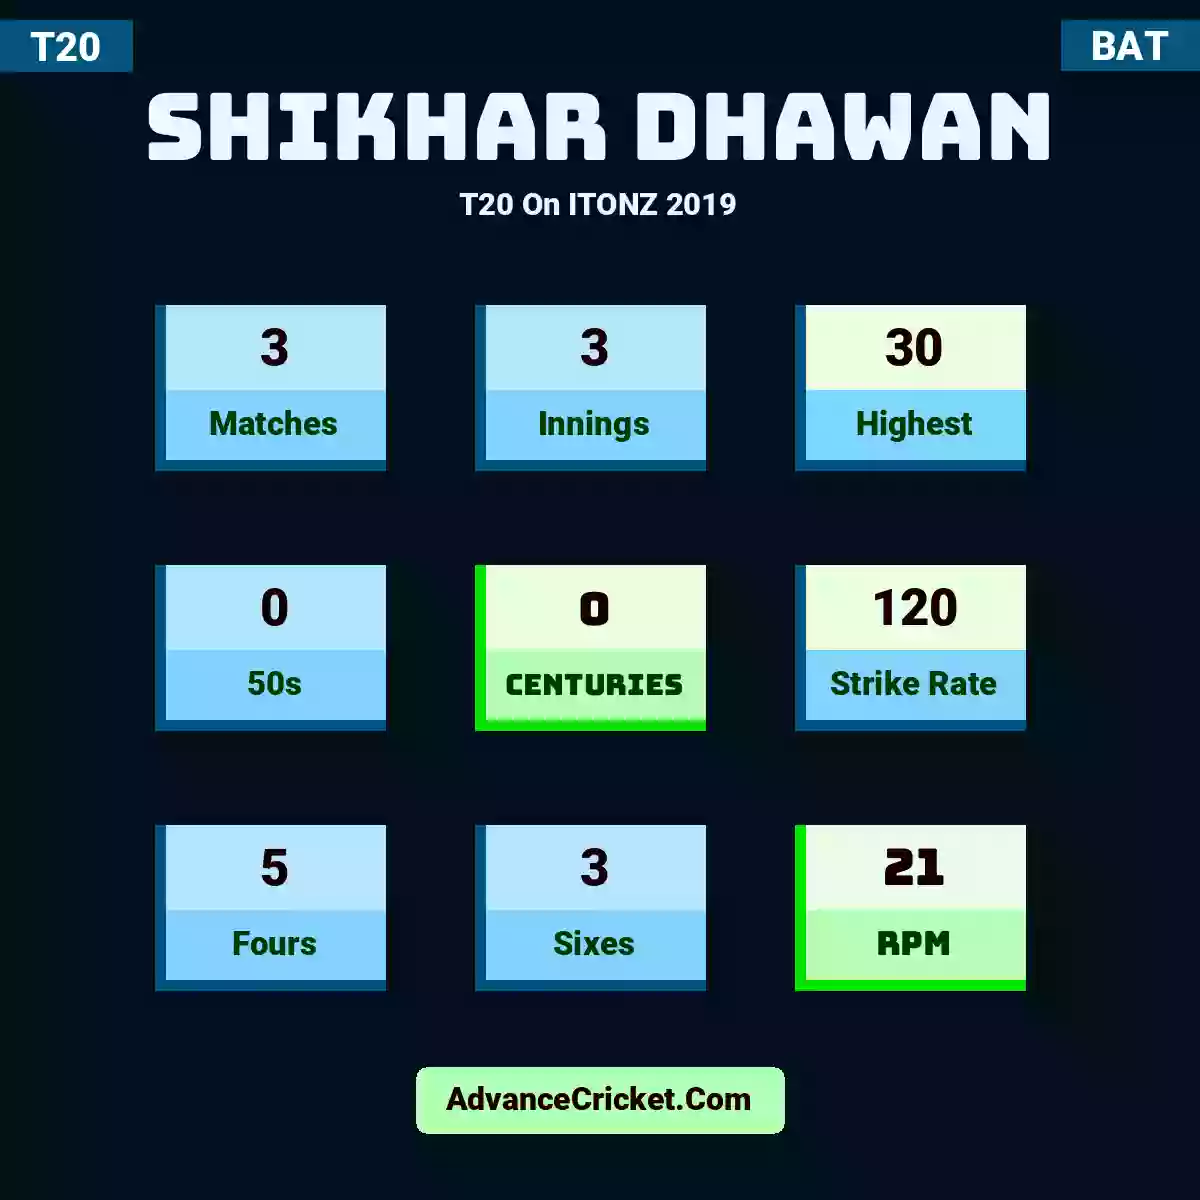 Shikhar Dhawan T20  On ITONZ 2019, Shikhar Dhawan played 3 matches, scored 30 runs as highest, 0 half-centuries, and 0 centuries, with a strike rate of 120. S.Dhawan hit 5 fours and 3 sixes, with an RPM of 21.